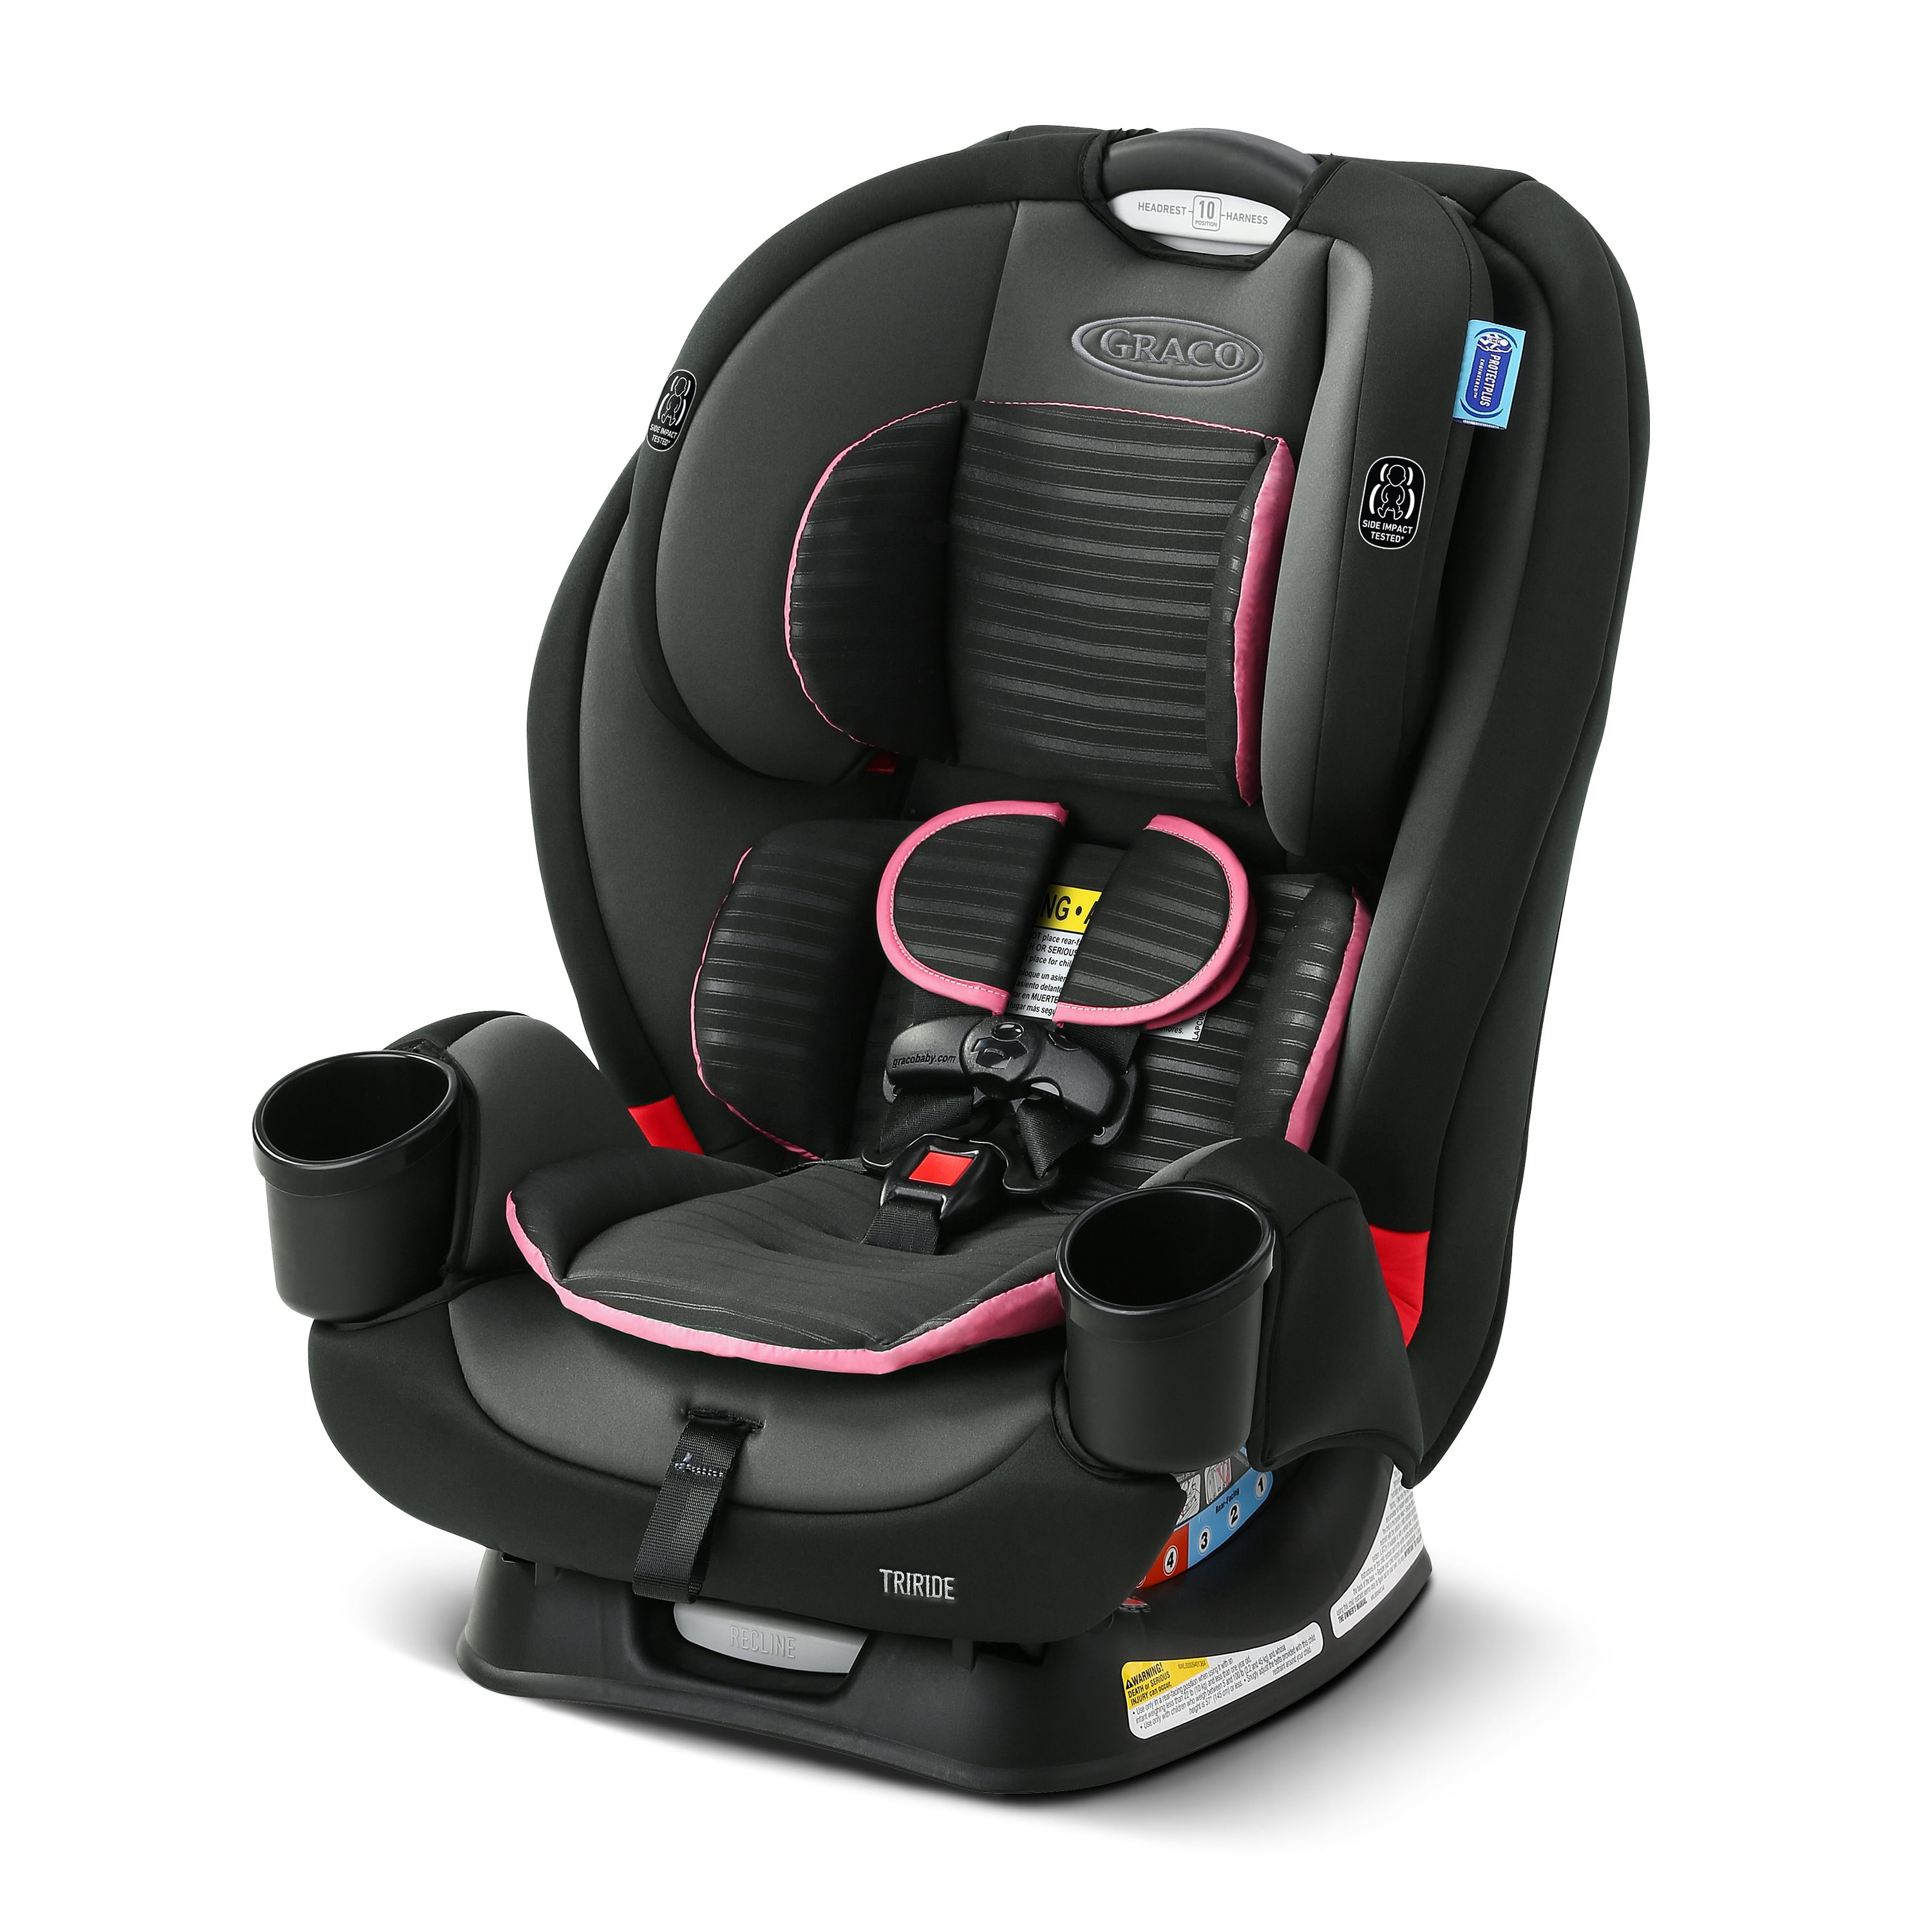 Graco Safety Car Seat for Child 3in1 Portable Booster Chair Harness Kids Toddler 